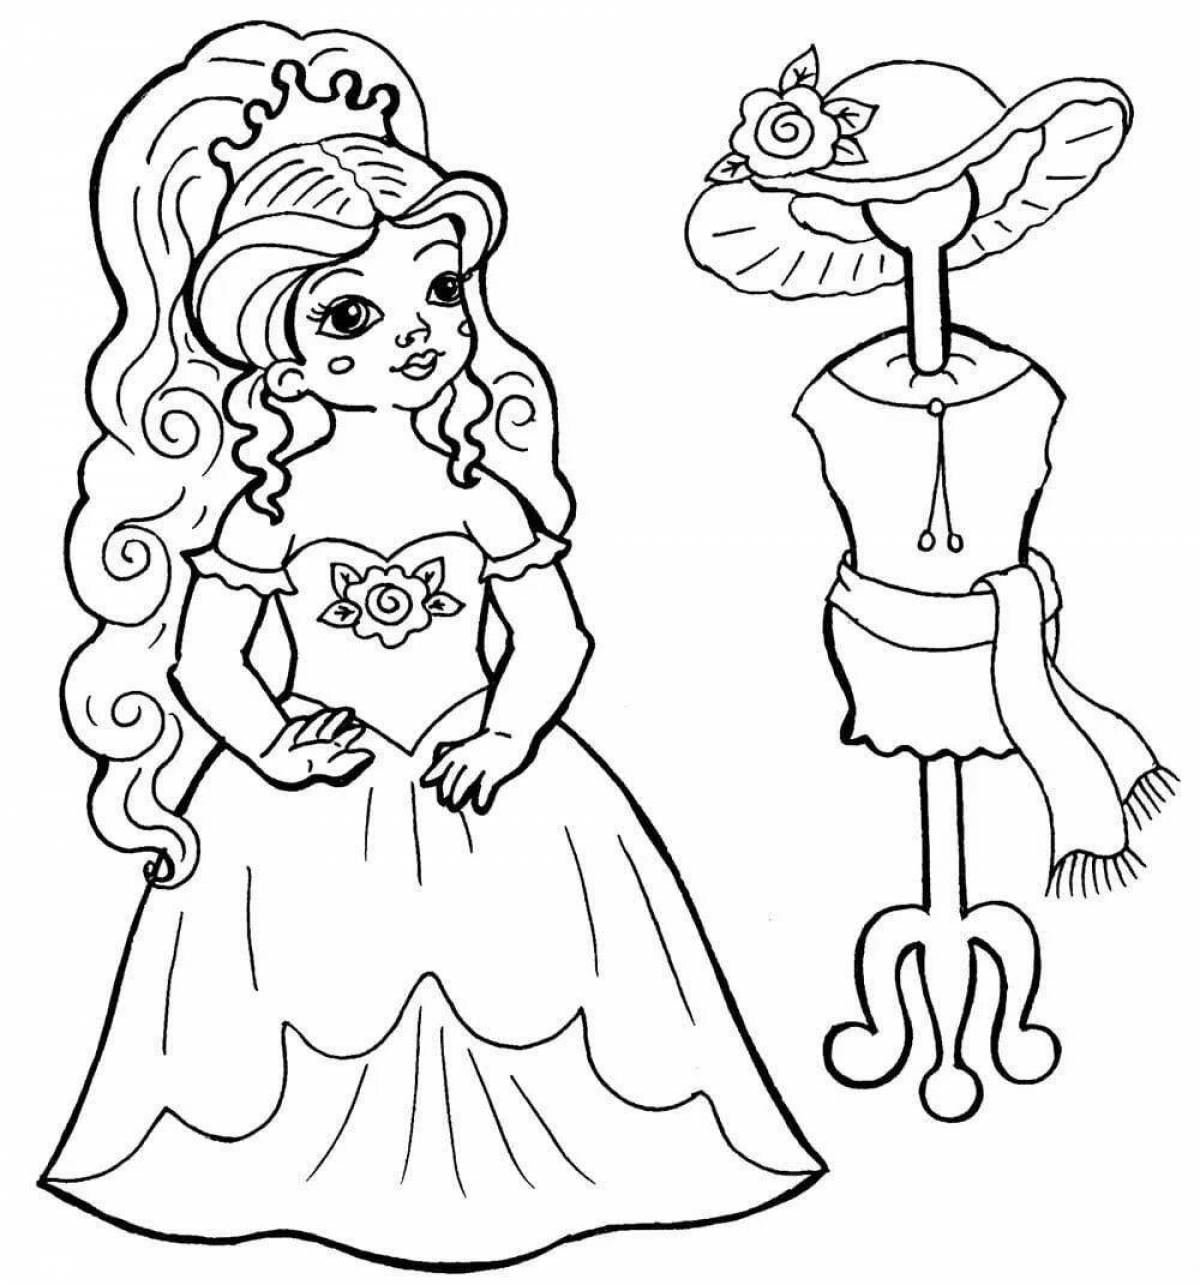 Princess coloring pages for girls 4-5 years old